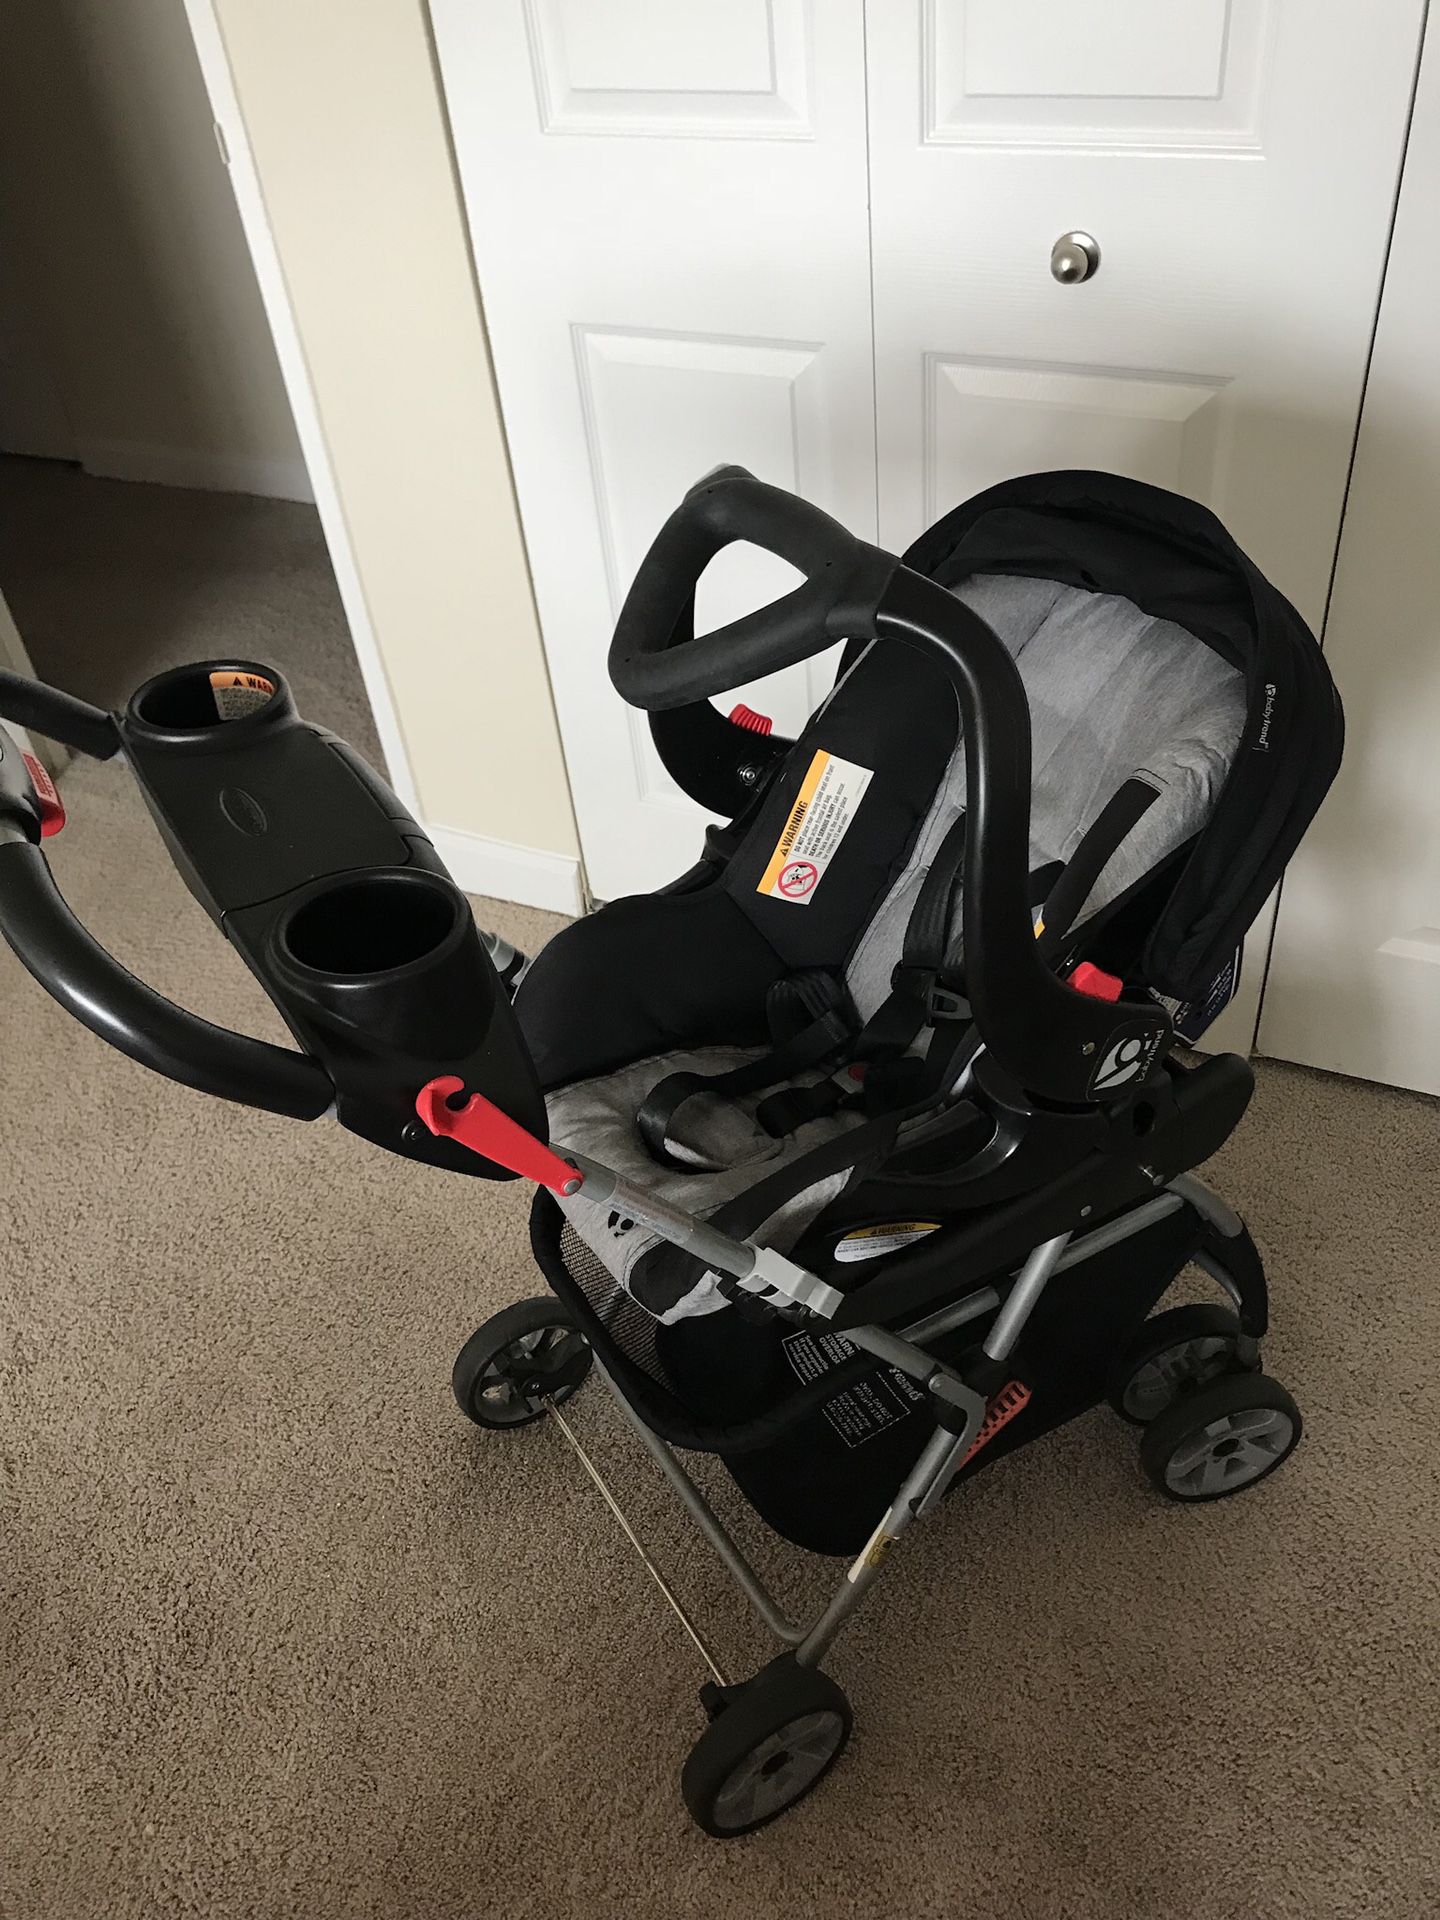 Baby trend snap and go stroller set